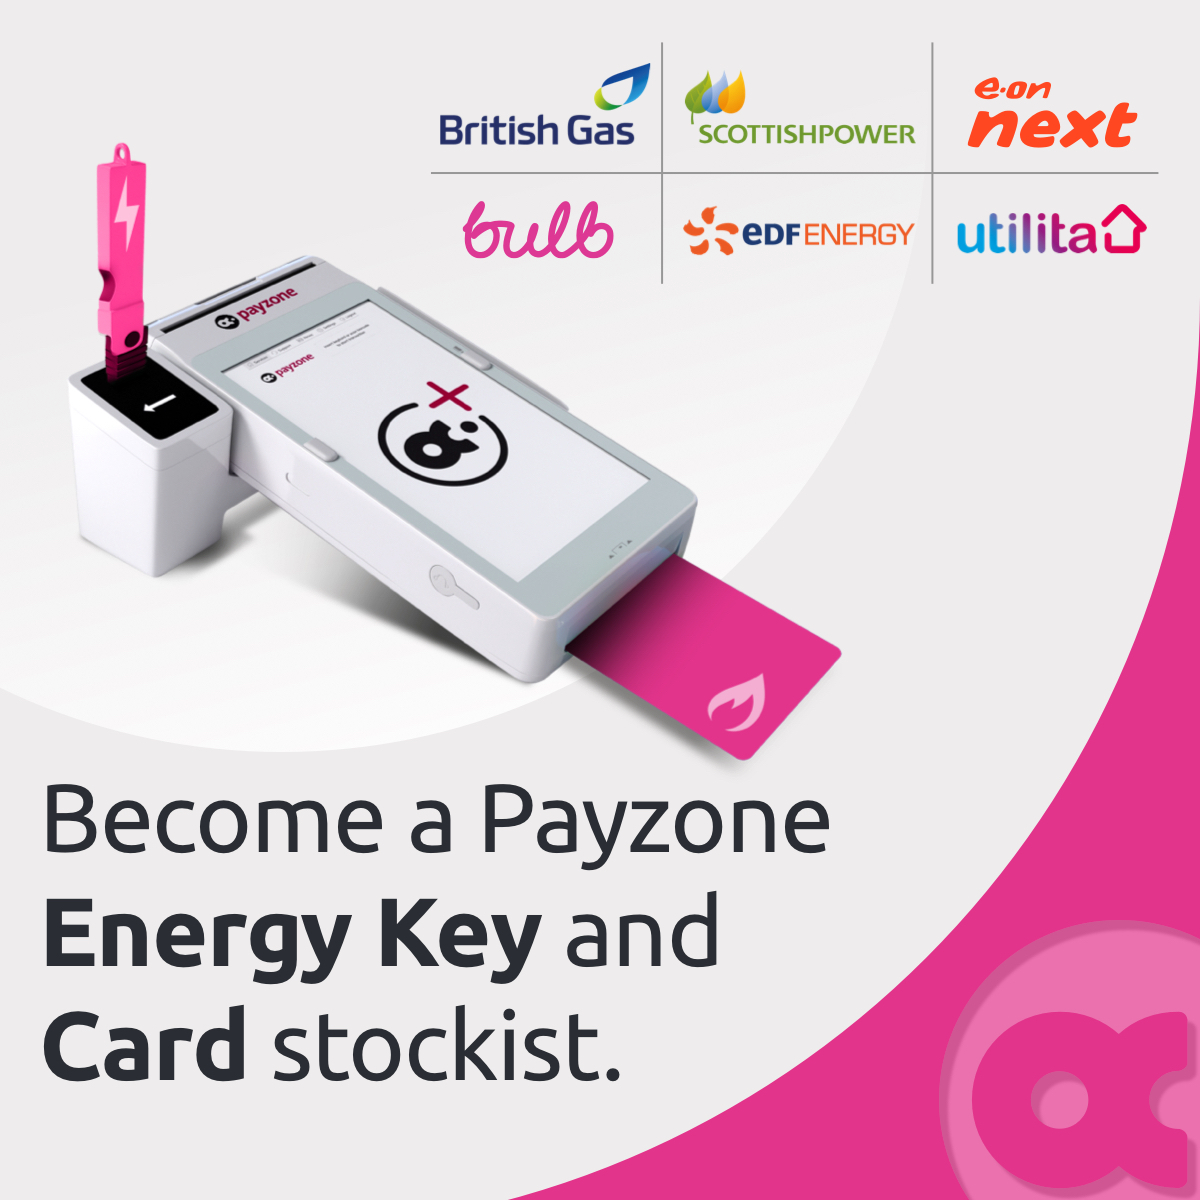 Want to stock and supply new electricity keys and gas cards to customers? Become a Payzone Energy Key & Card Stockist! It’s free, drives footfall, and is a great way to earn commission when customers top-up. ow.ly/onv150PFmMz